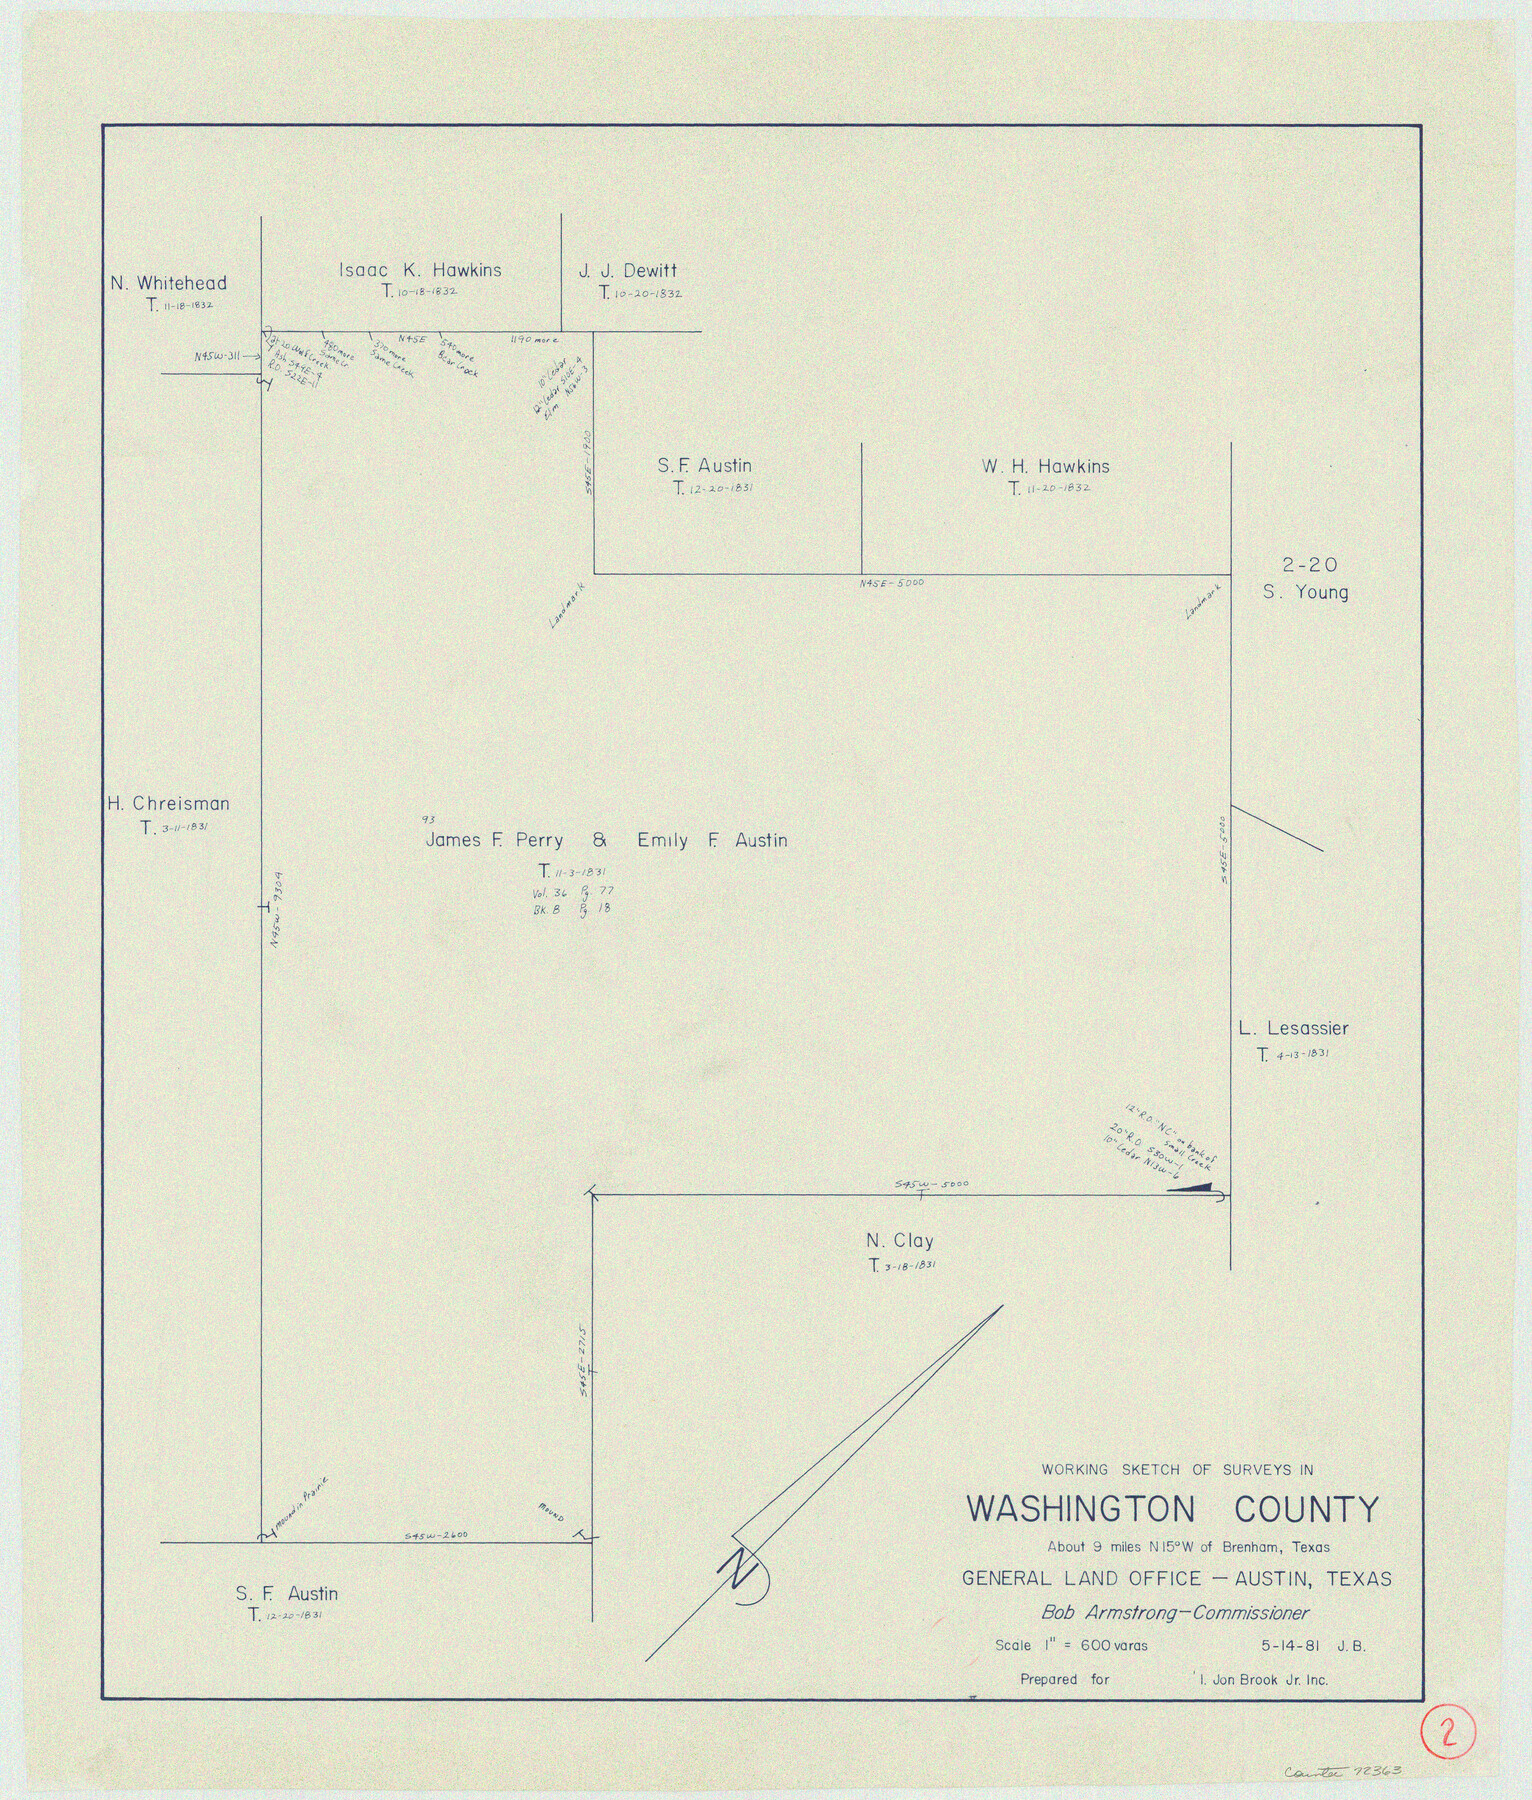 72363, Washington County Working Sketch 2, General Map Collection